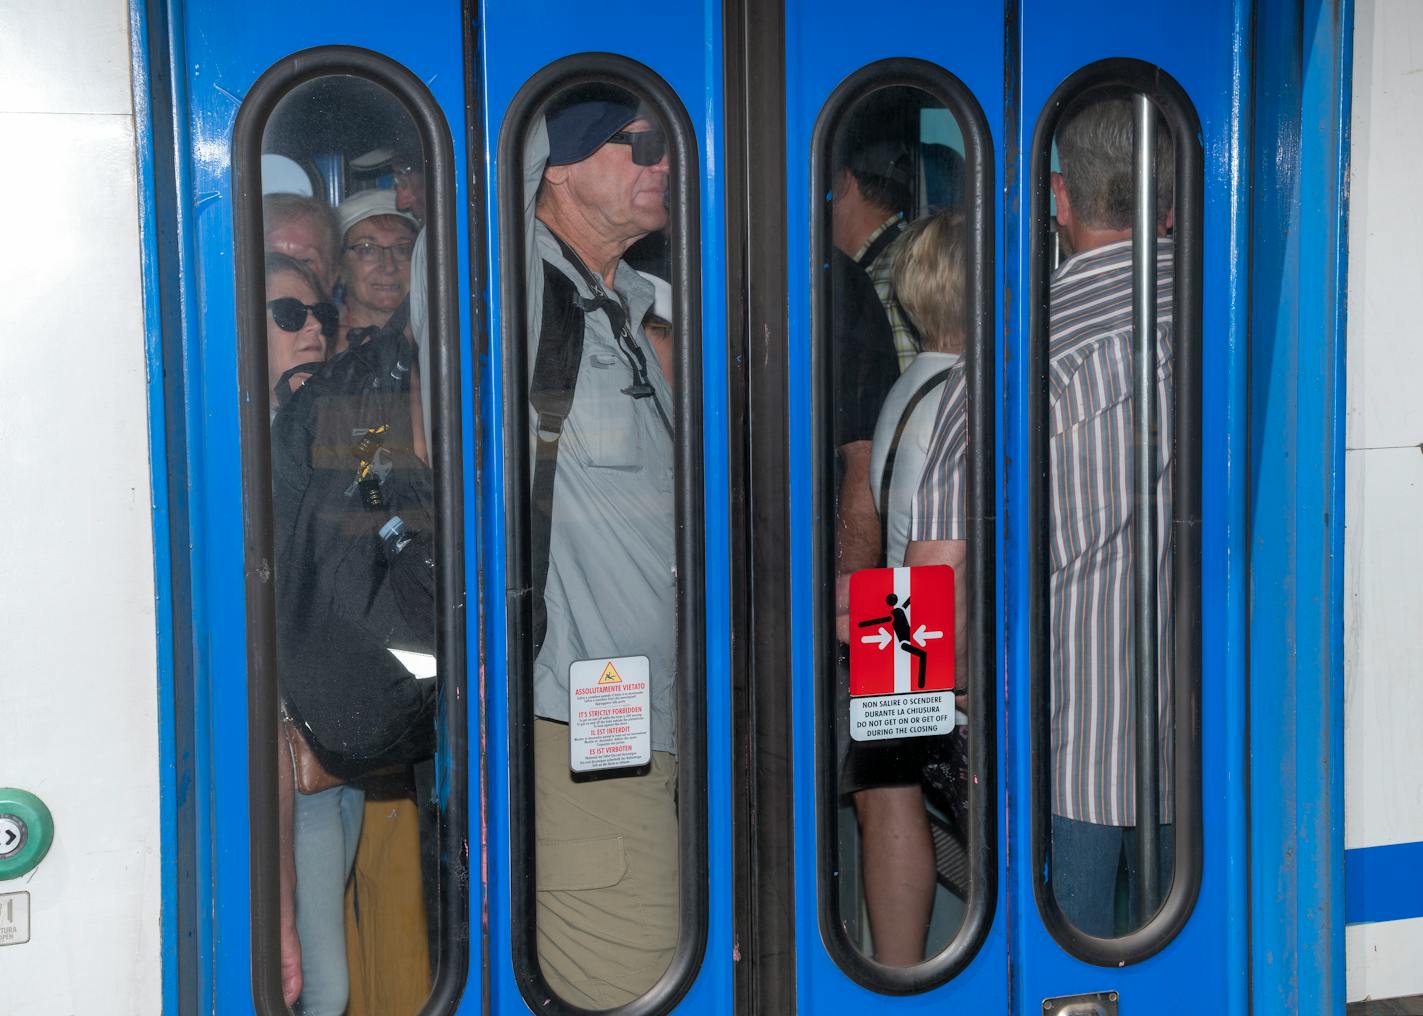 Tourists packed into a train car that will transport them between villages.